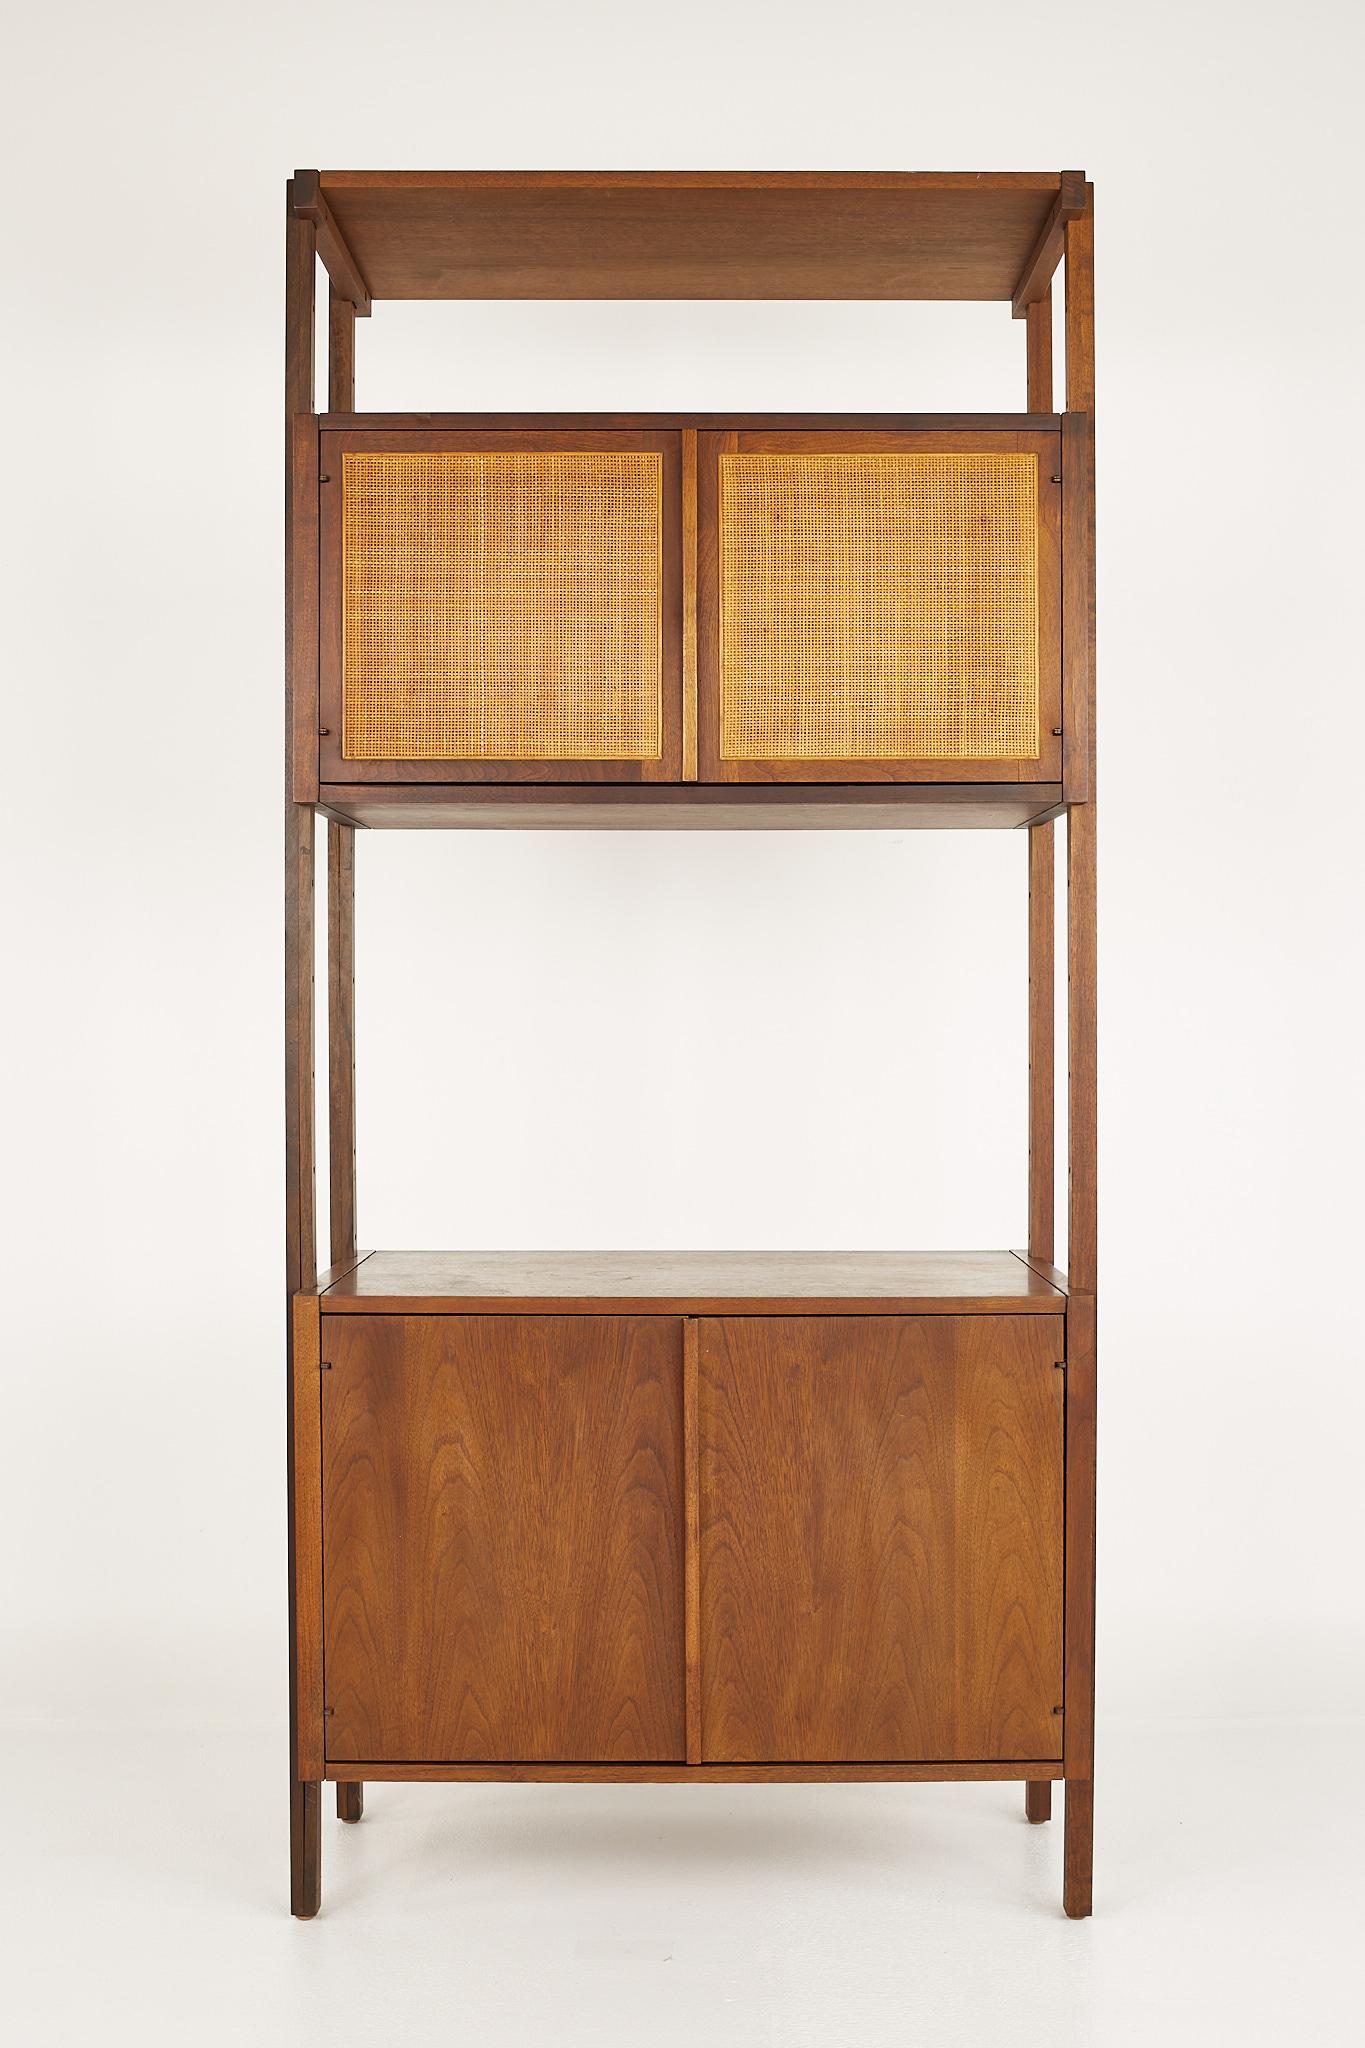 Founders style mid century walnut cane front freestanding wall unit section bookcase

This bookcase measures: 33.75 wide x 16 deep x 73 inches high

?All pieces of furniture can be had in what we call restored vintage condition. That means the